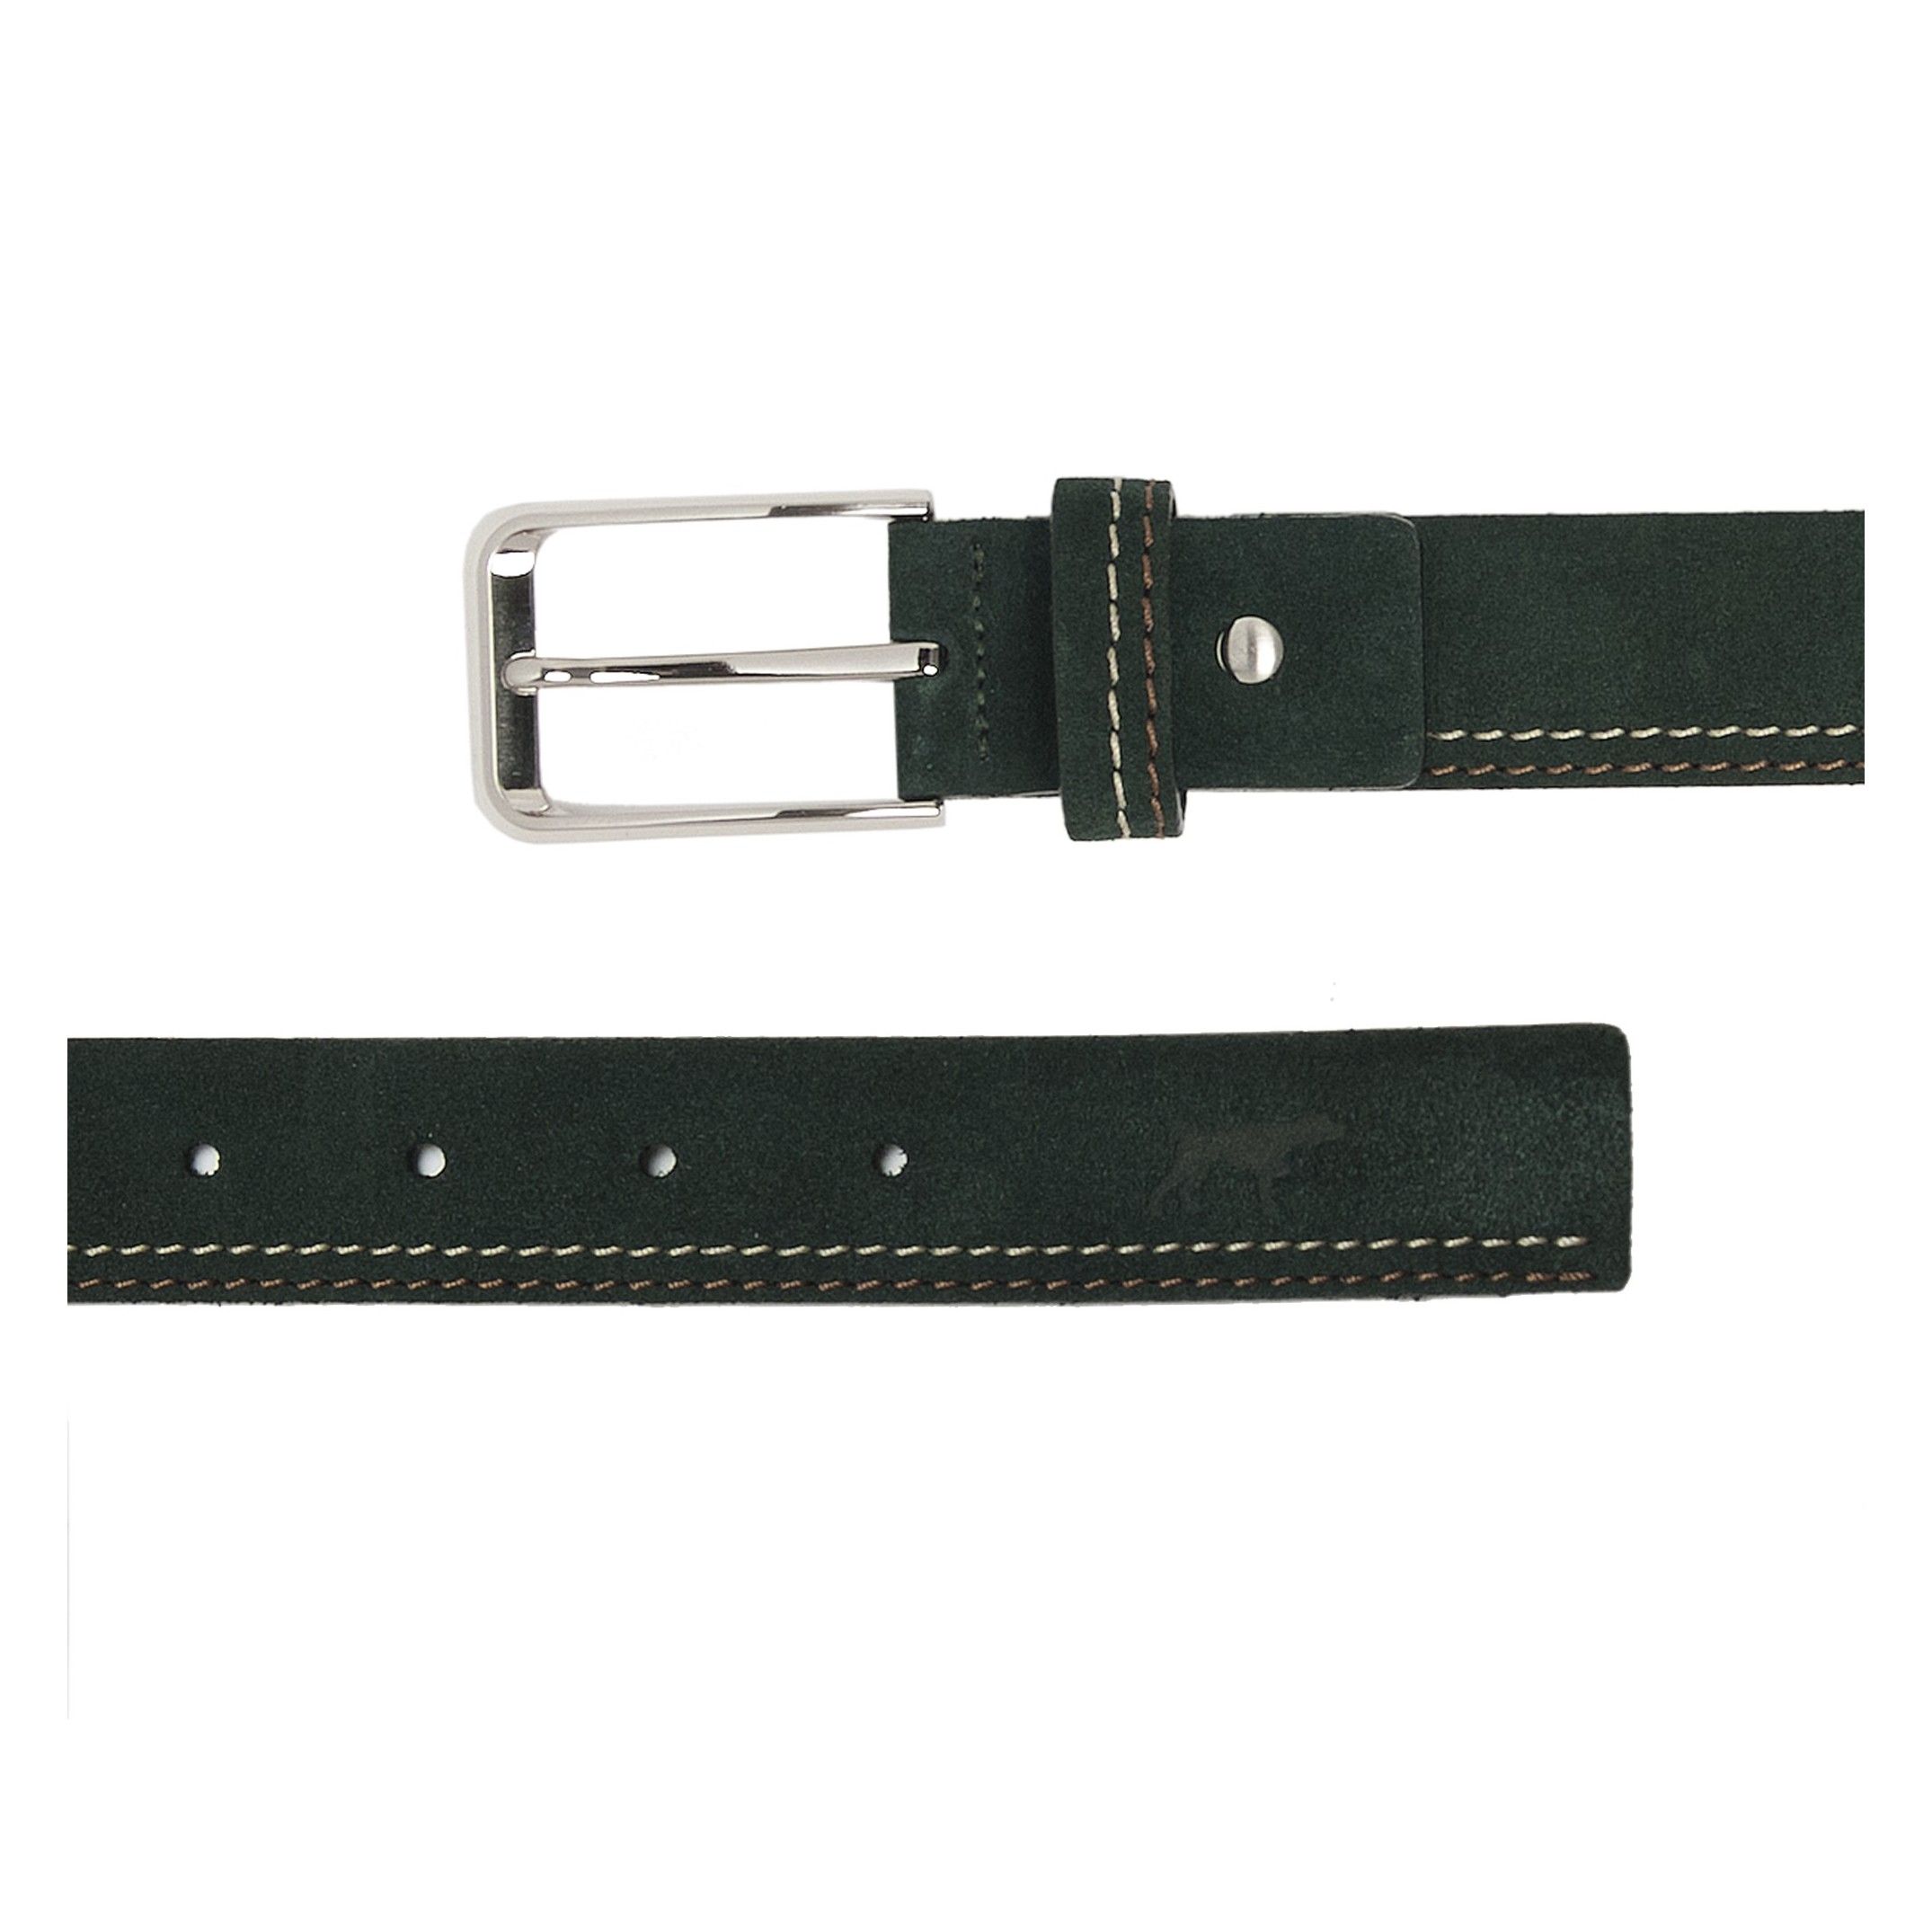 Castellanisimos men's leather belt with double stitching on the lower part in two shades. Metal buckle. Width: 3.5 cm. MADE IN SPAIN.